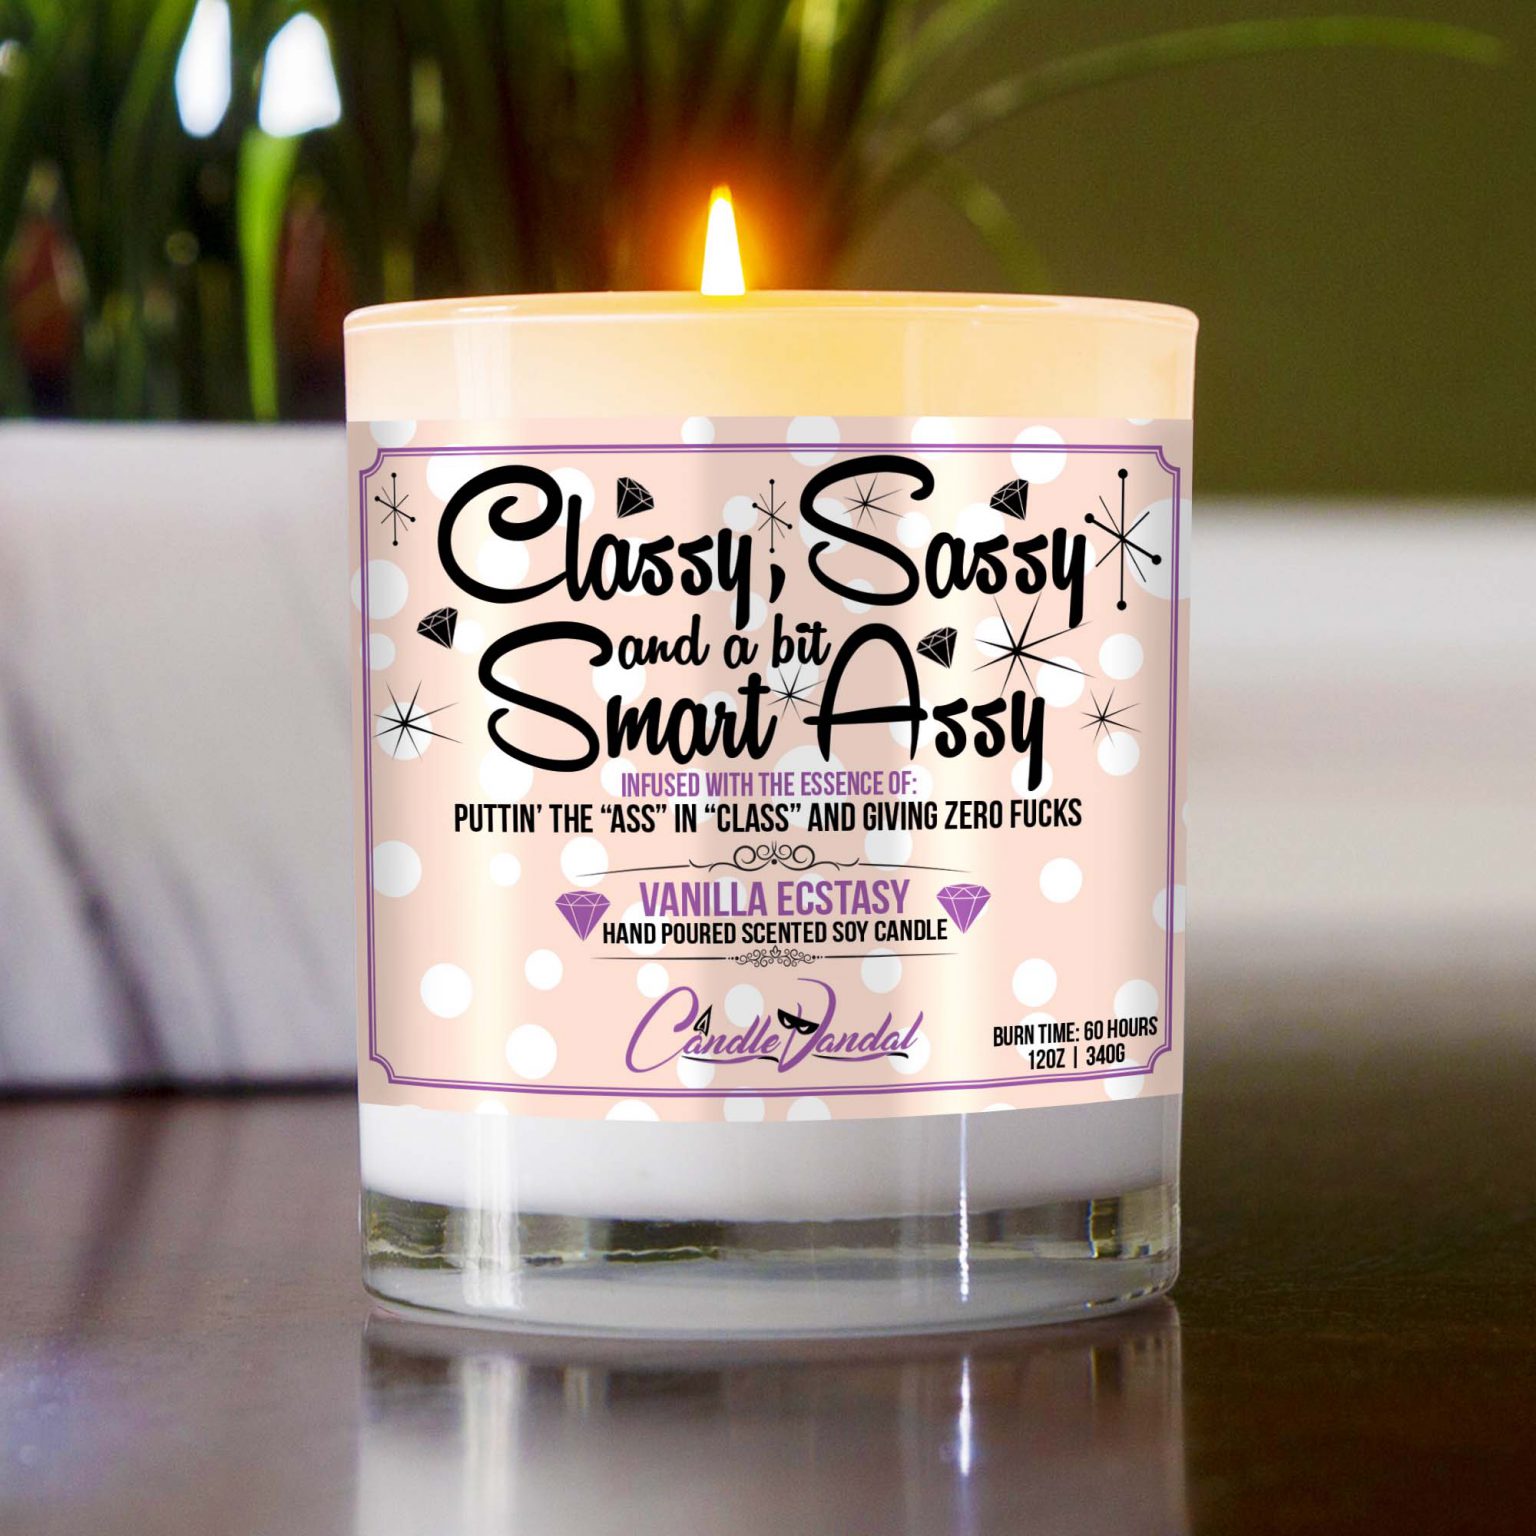 Classy Sassy And A Bit Smart Assy Candle Funny And Raunchy